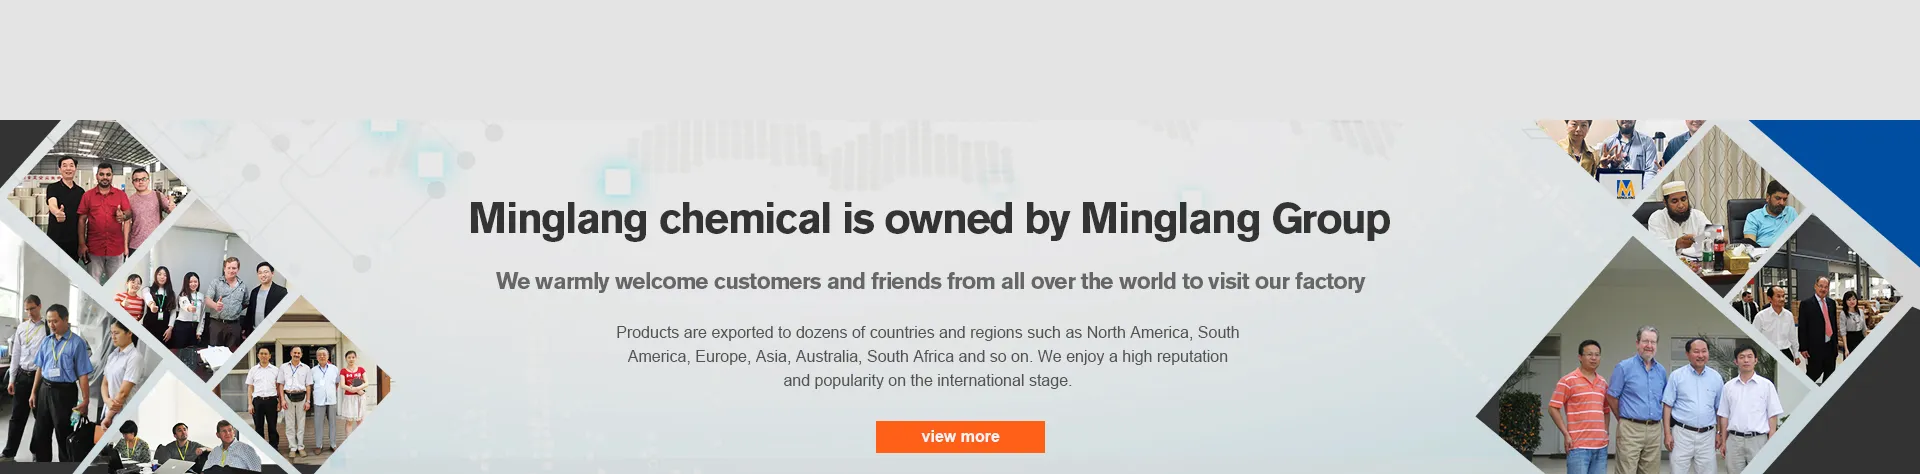 Minglang chemical is owned by Minglang Group